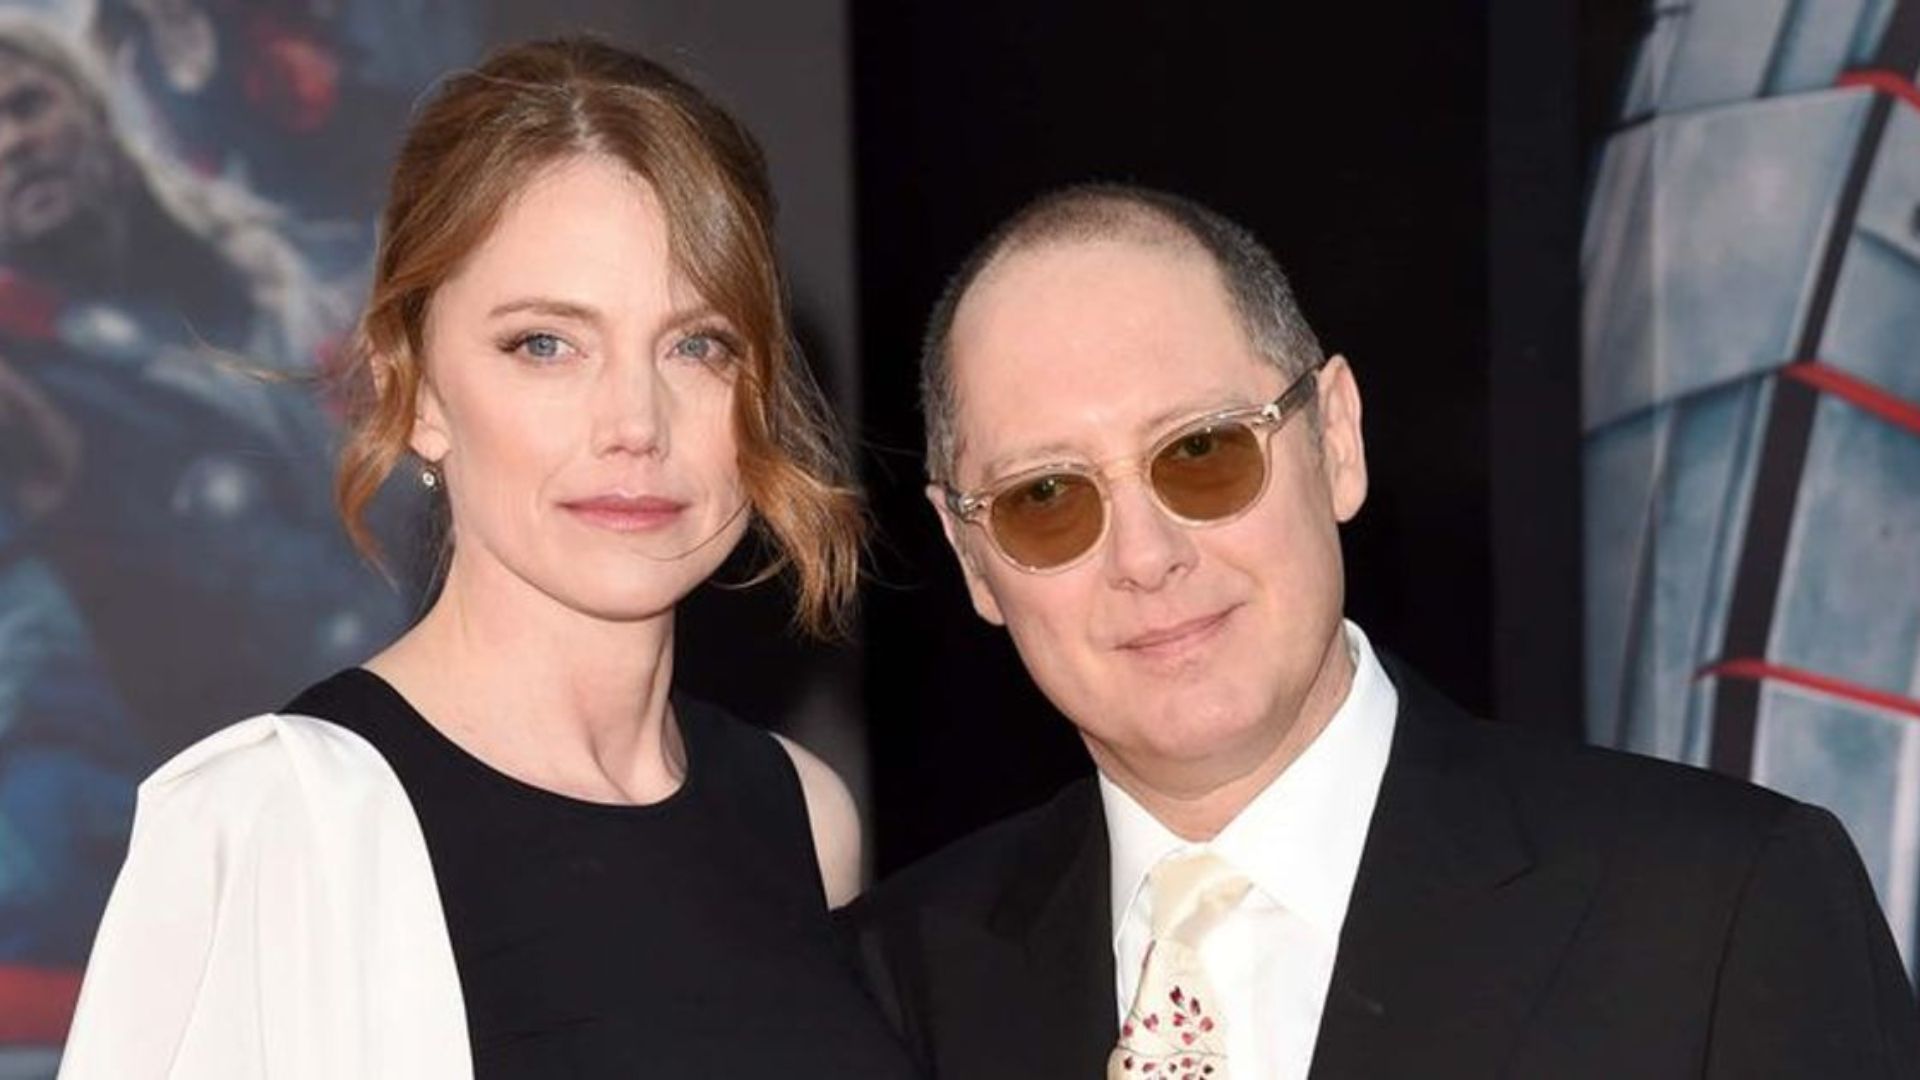 Victoria Spader With Her Ex-Husband James Todd Spader Both Wearing Black Formal Outfit